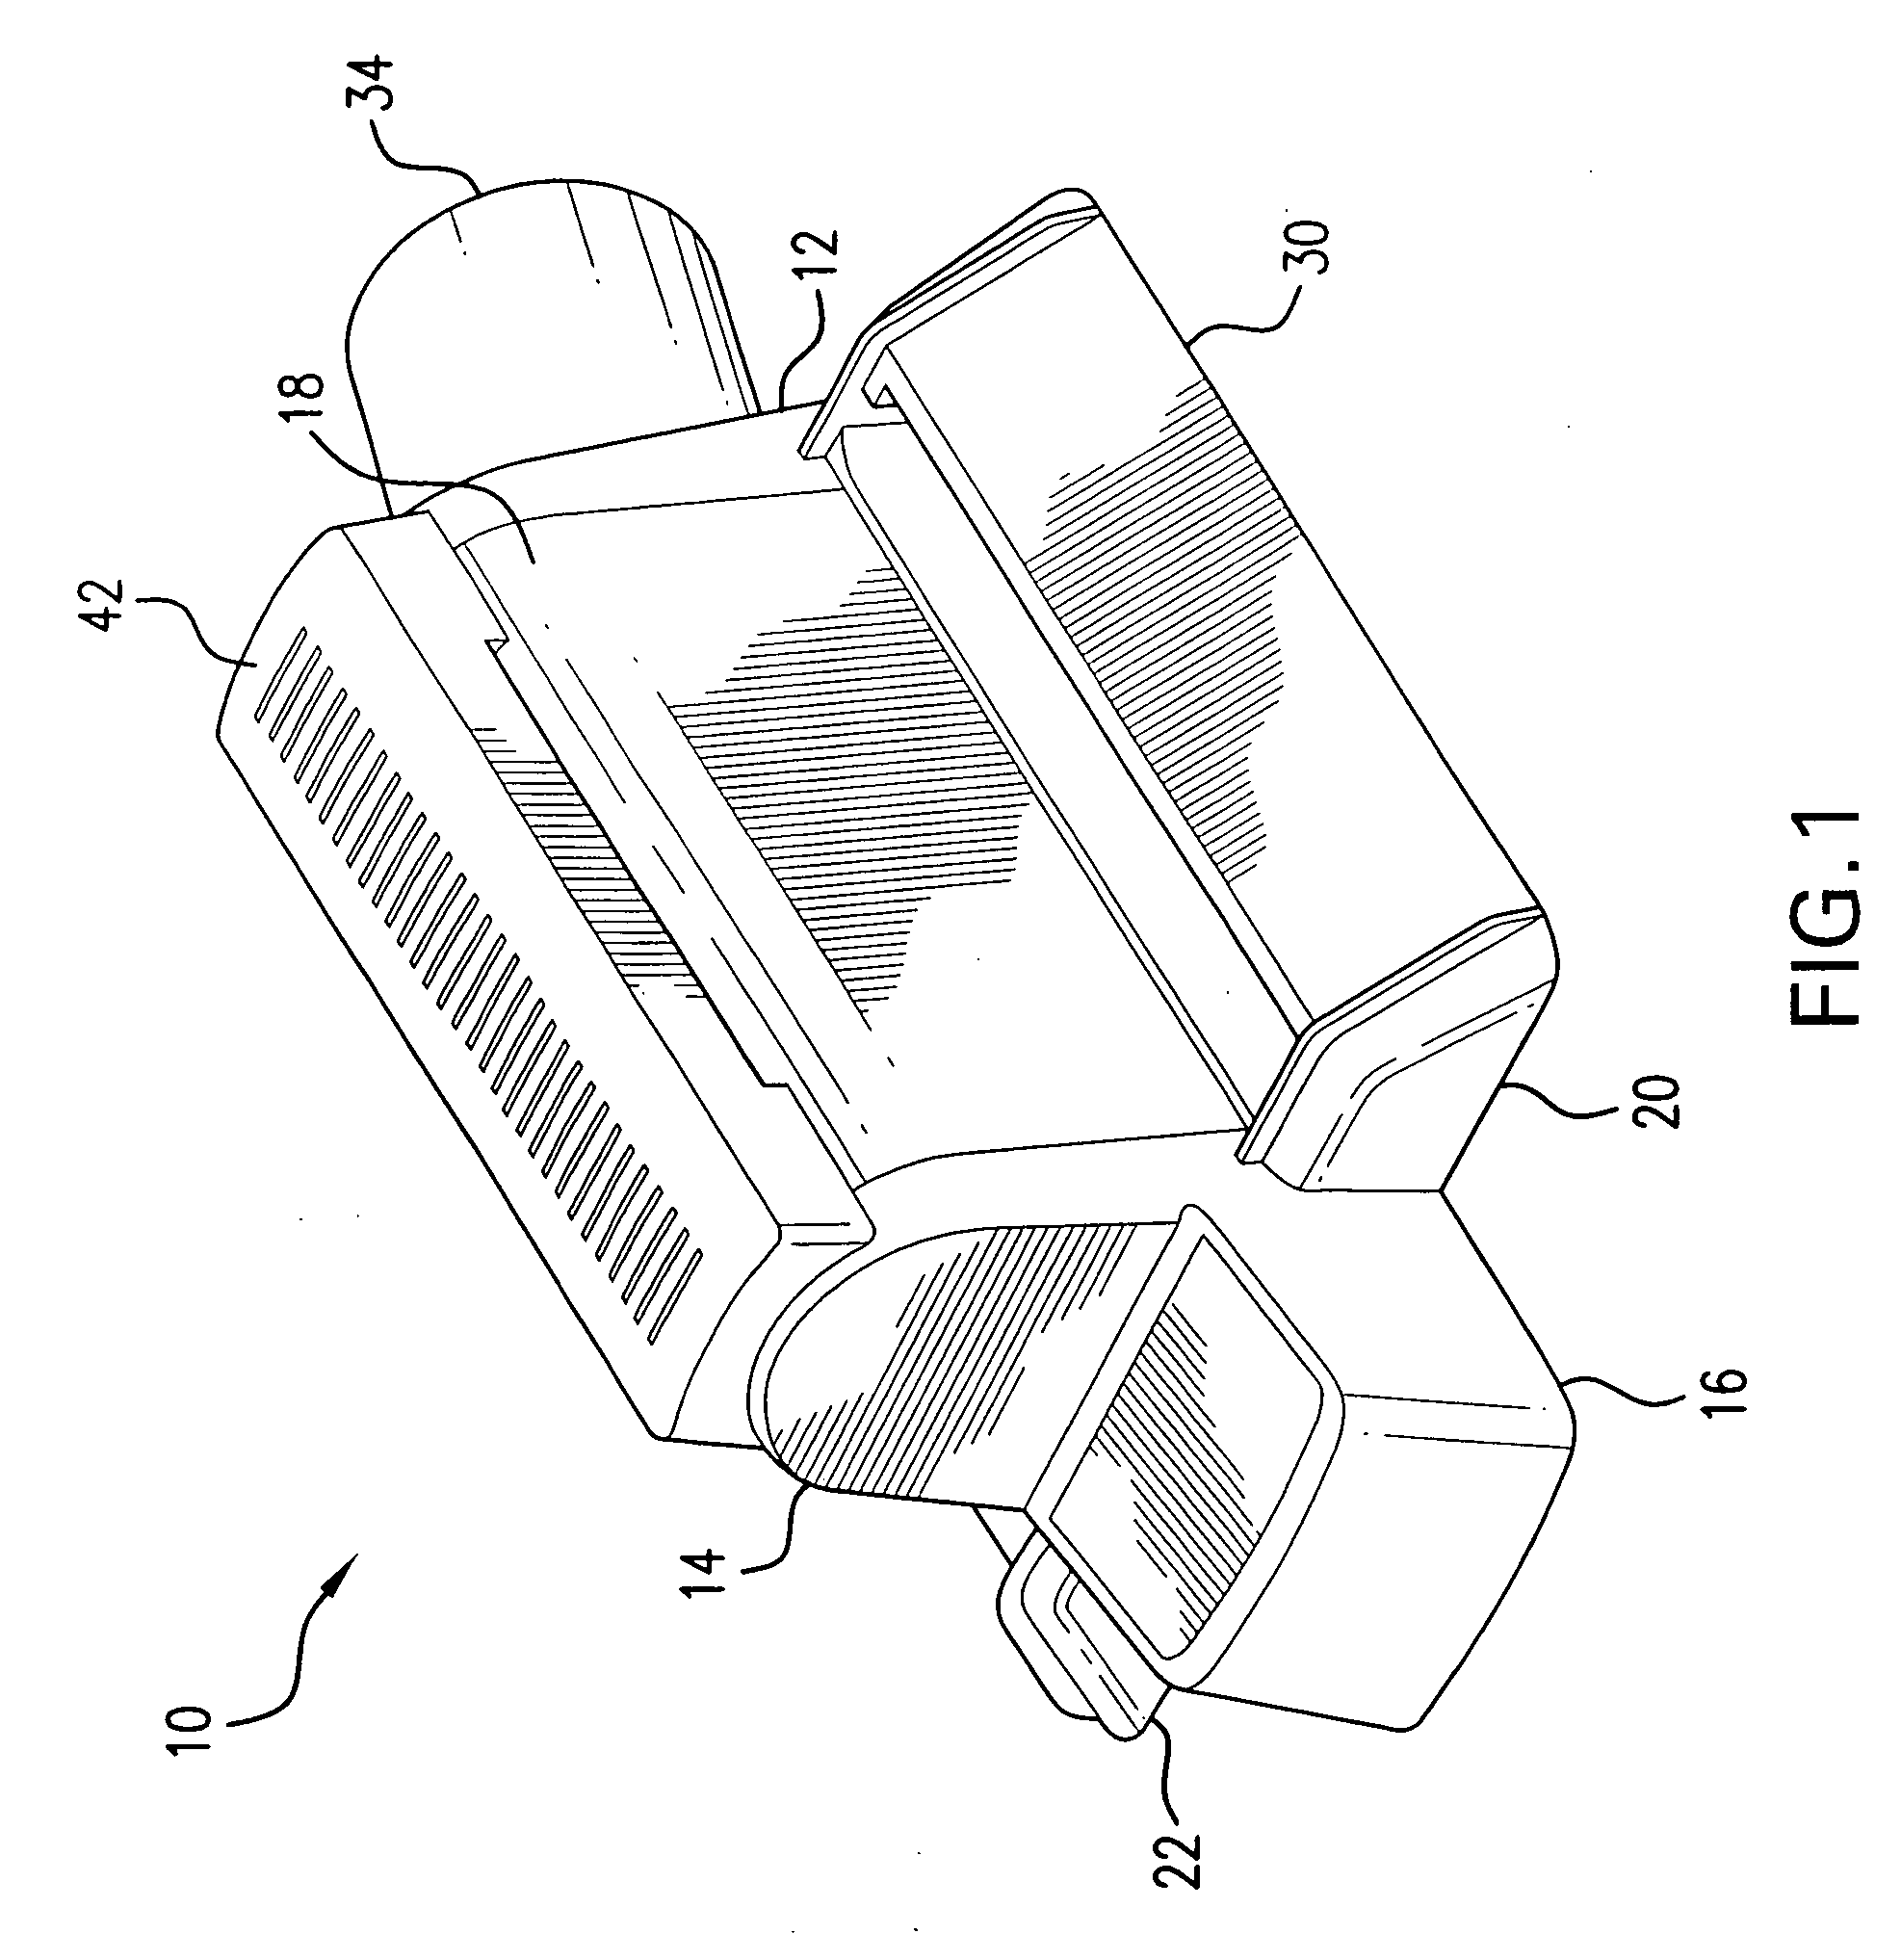 Methods, apparatus and compositions for abatement of bed bugs